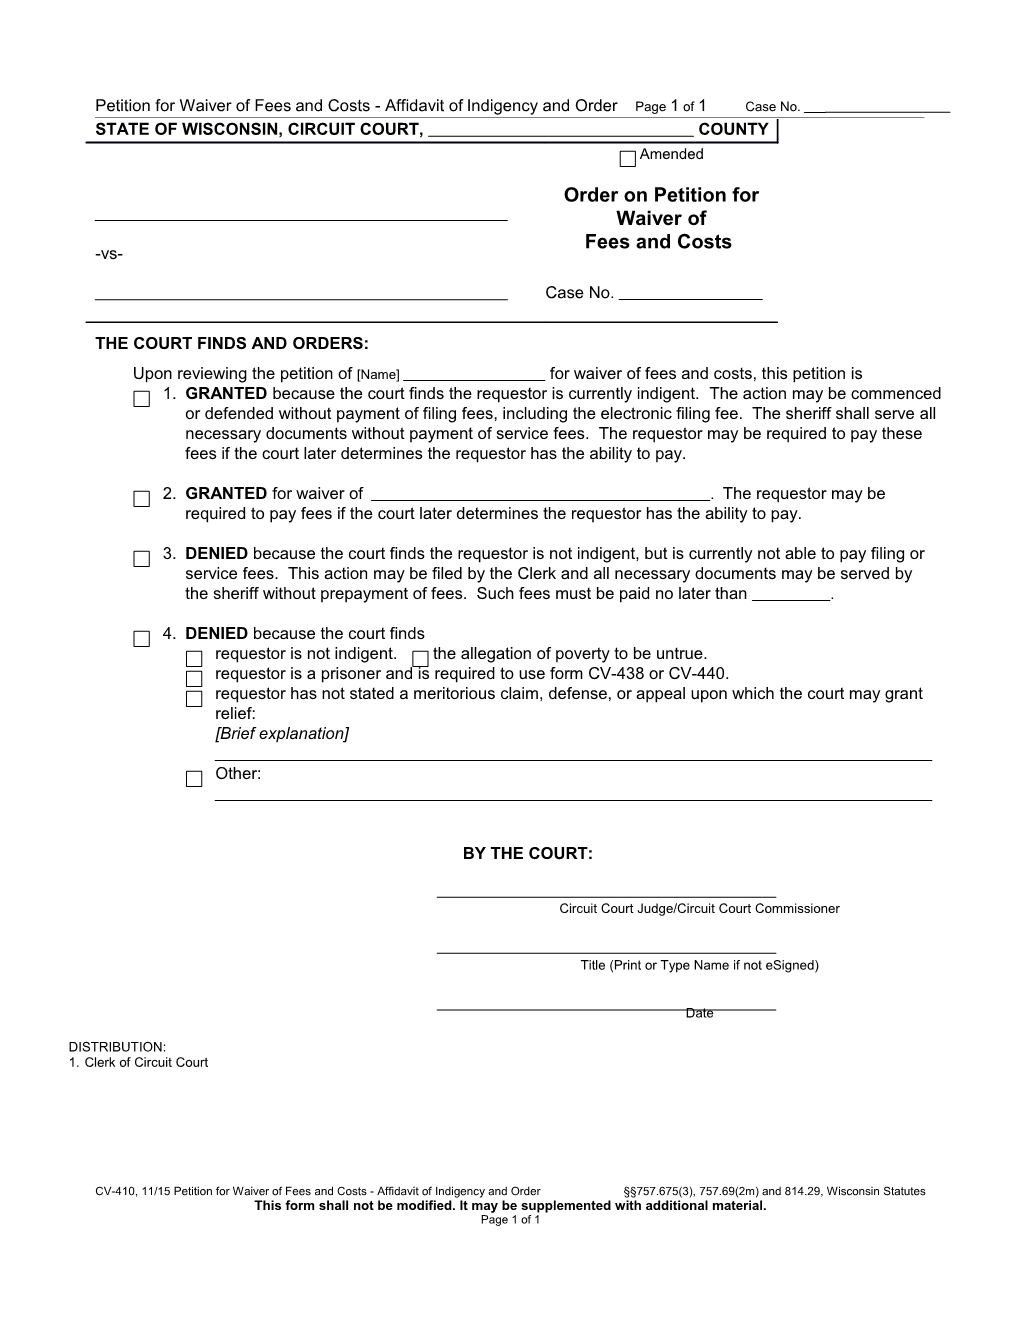 CV-410B: Order on Petition for Waiver of Fees and Costs